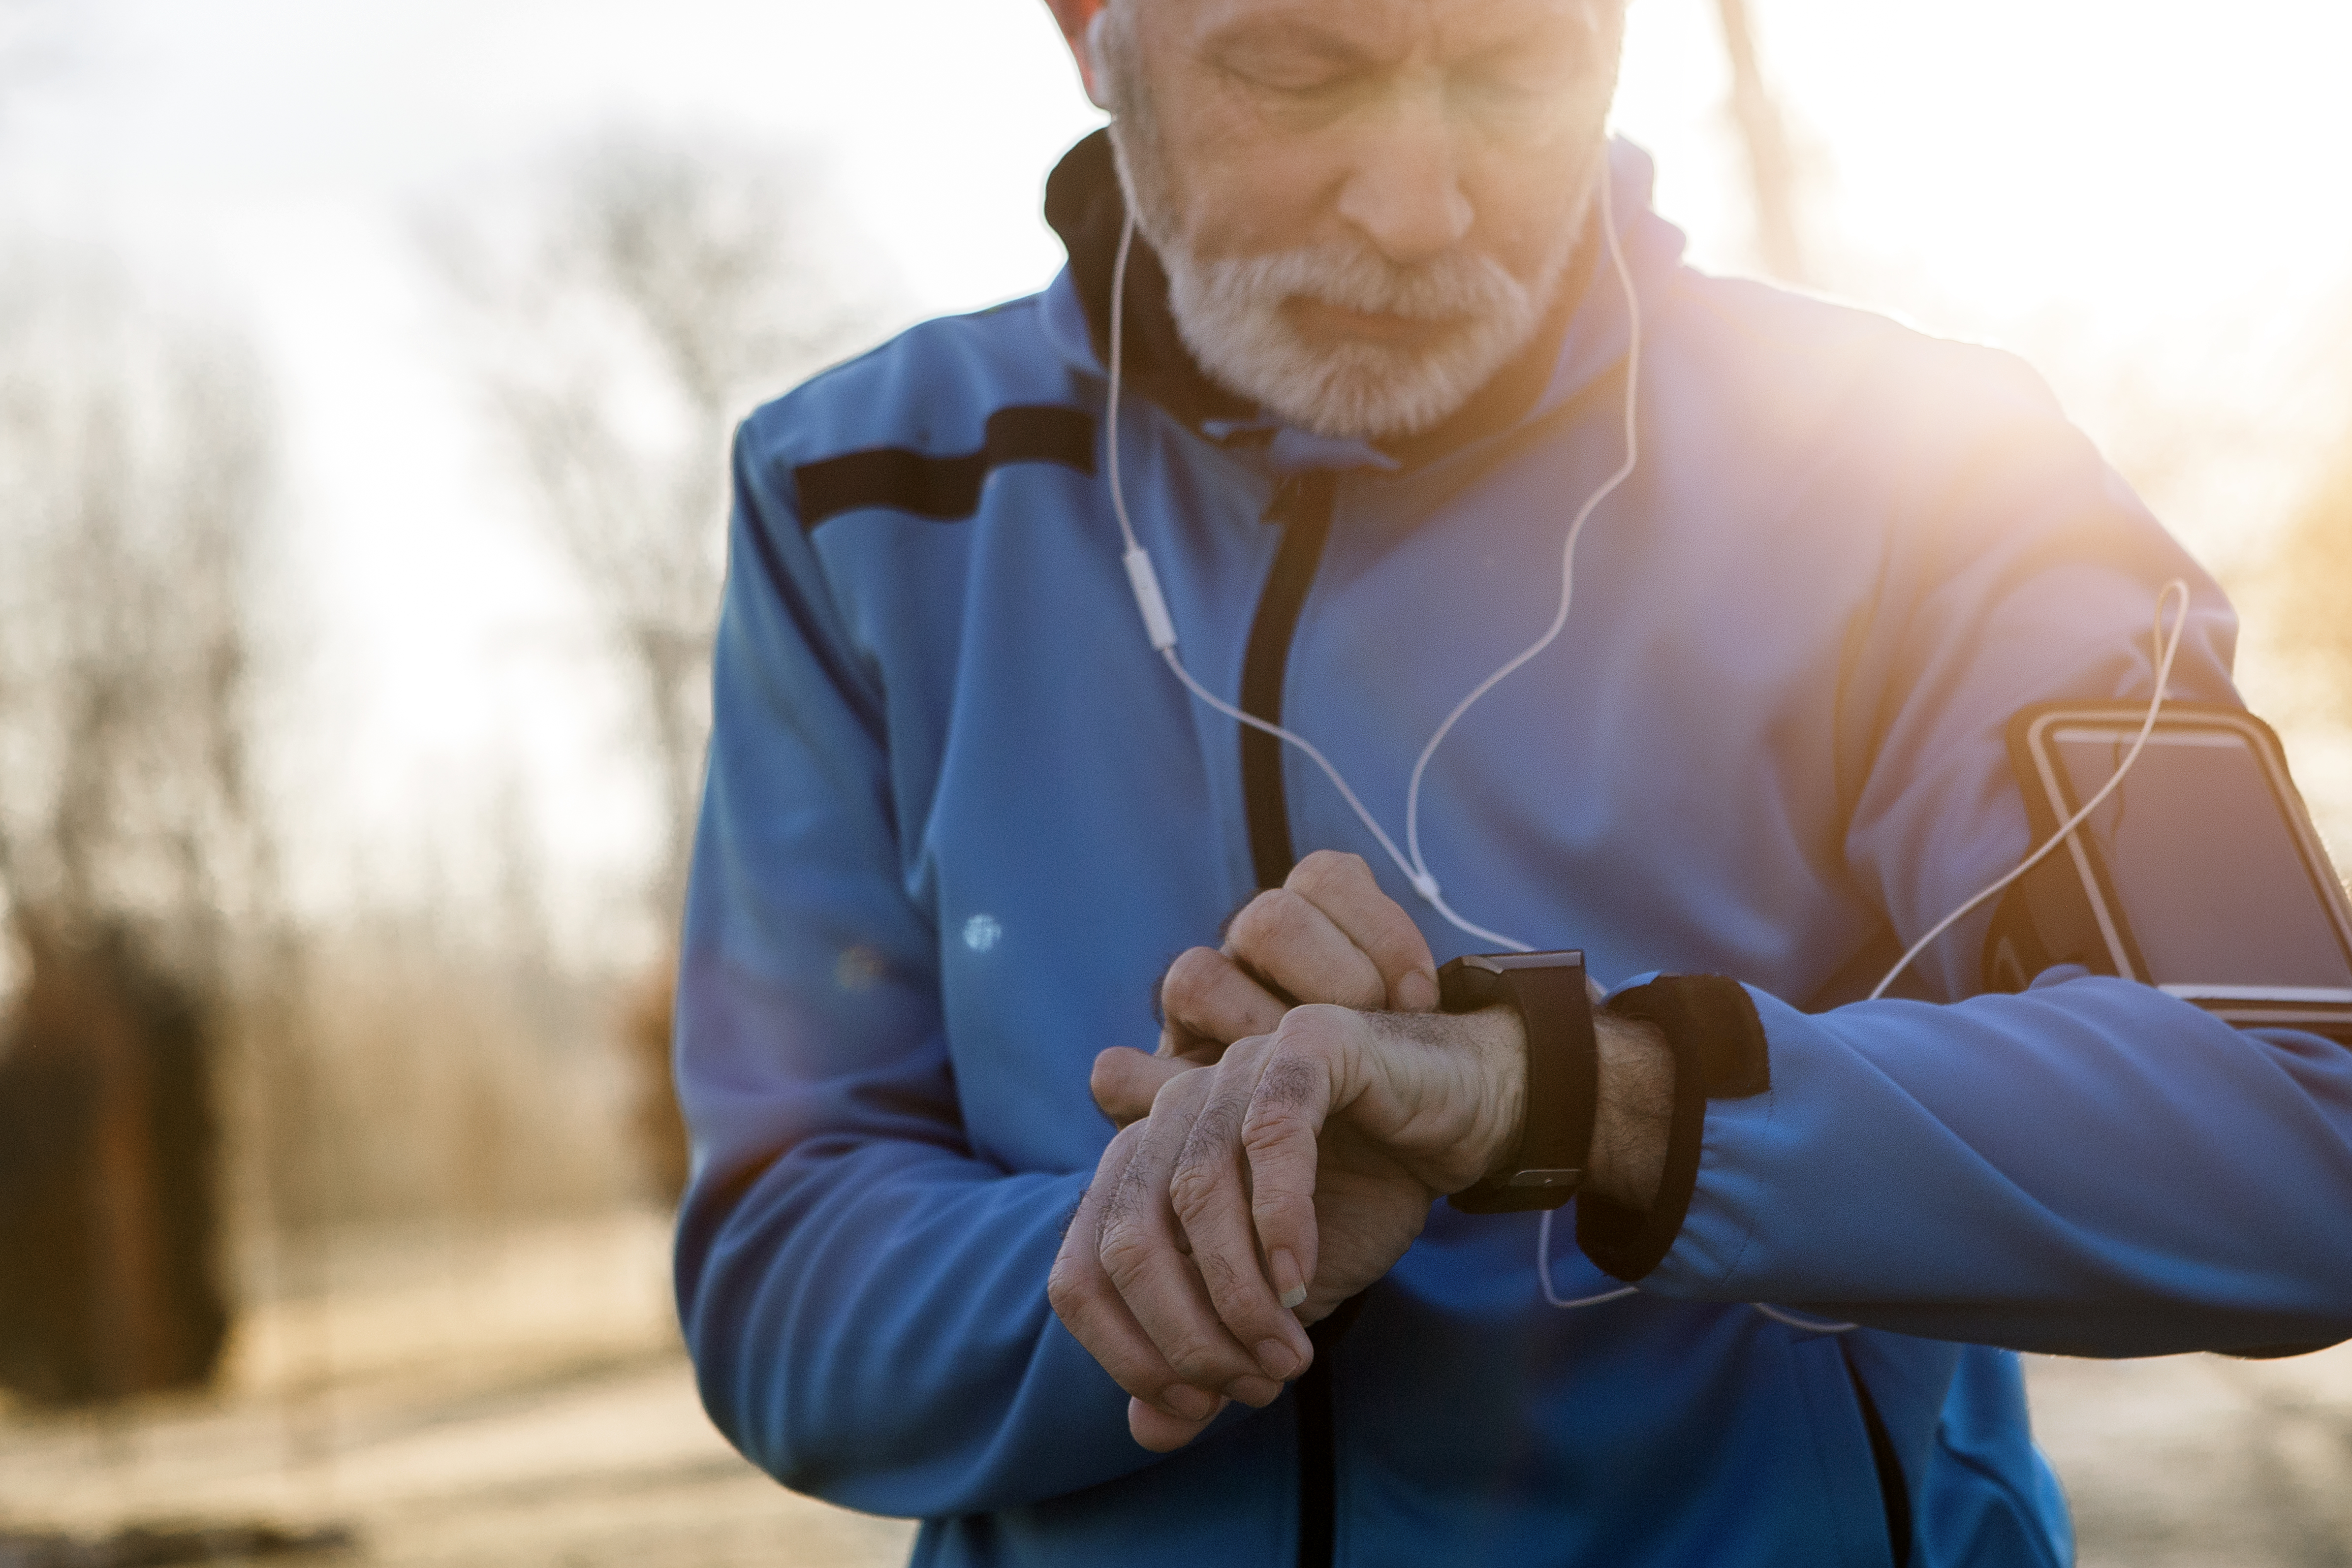 male jogger looking at watch wearing headphones outdoors